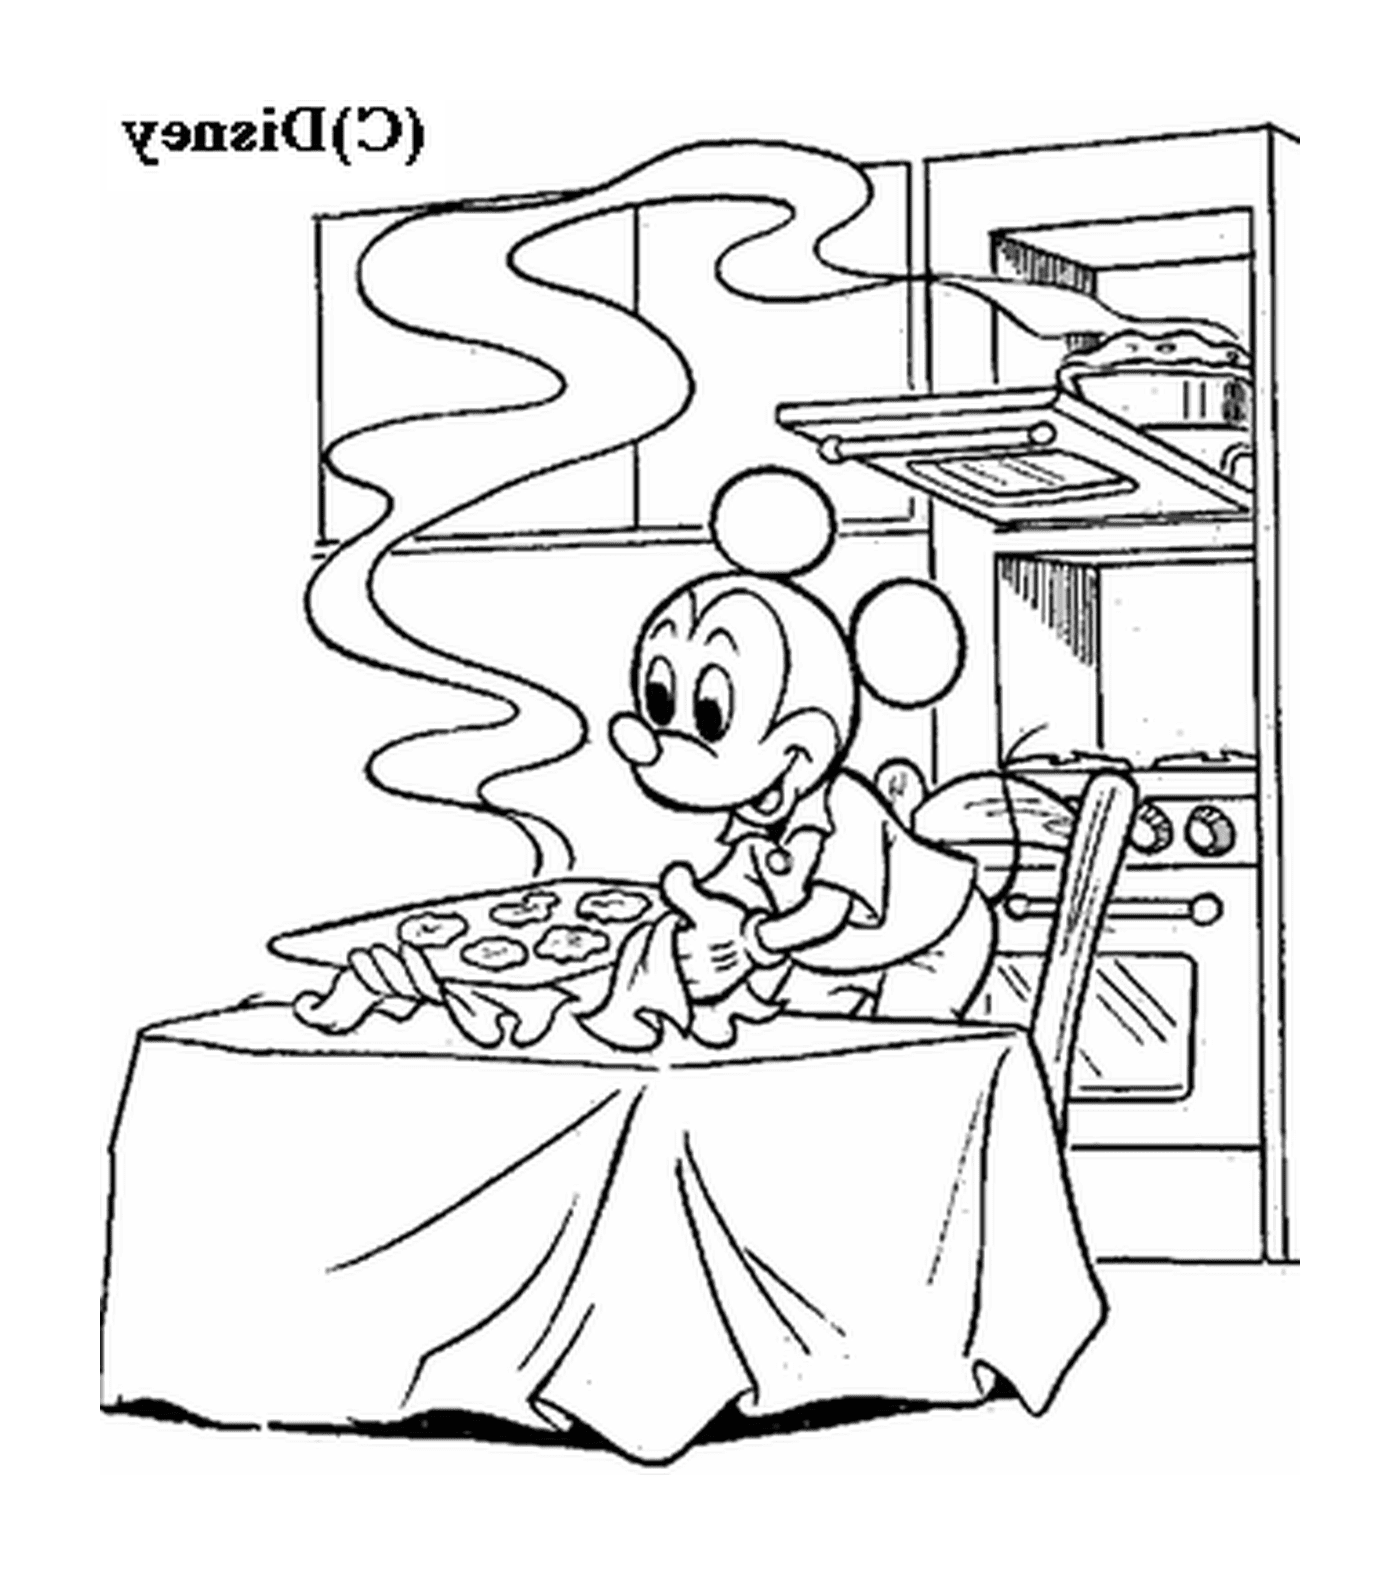  Mickey makes cookies: a mouse sitting at a table in front of a stove 